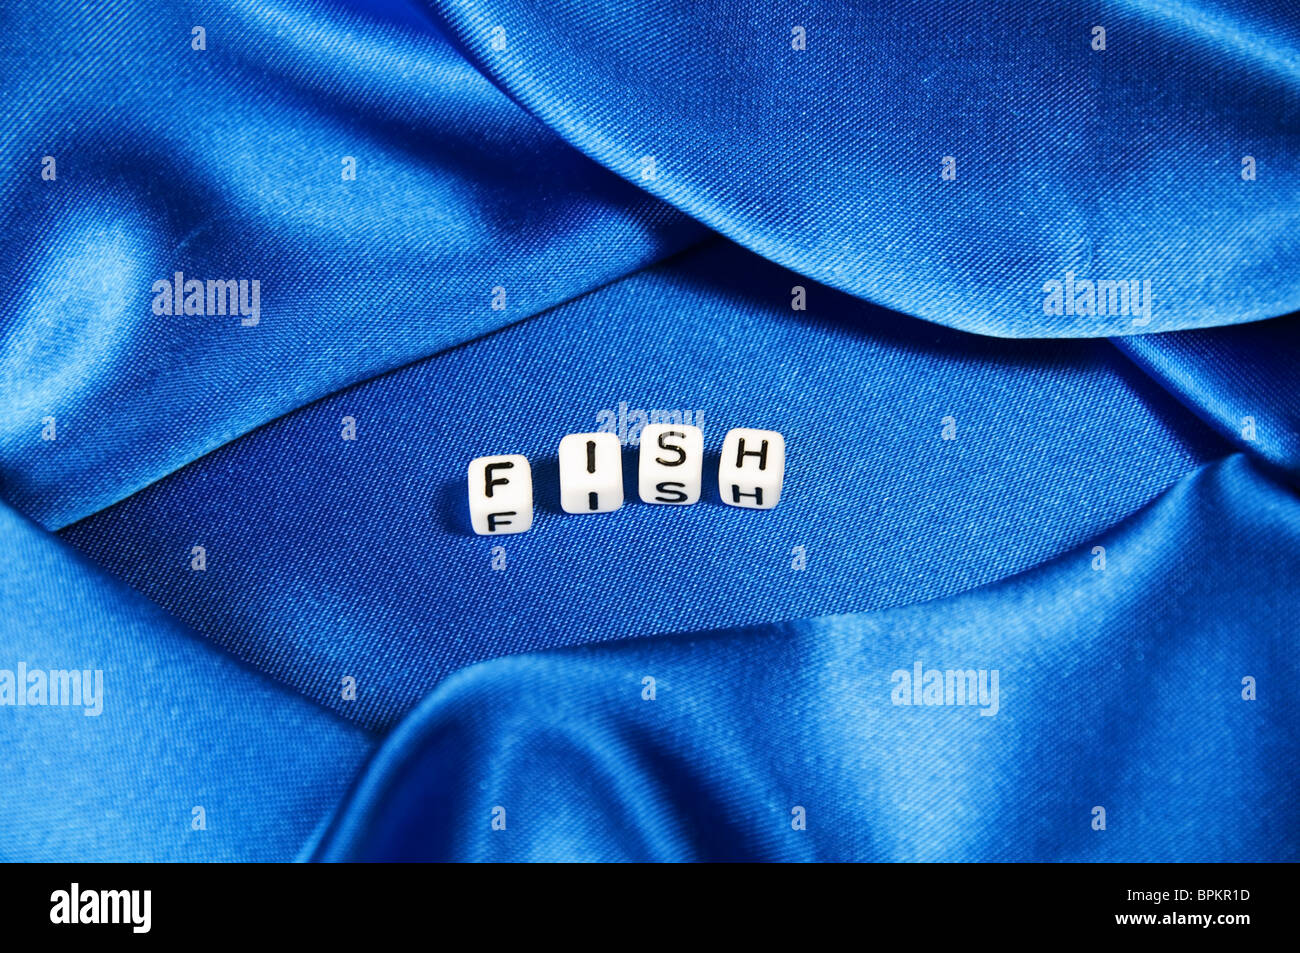 Royal blue satin background with rich folds and wrinkles for texture is the word fish in black and white cube lettering series Stock Photo